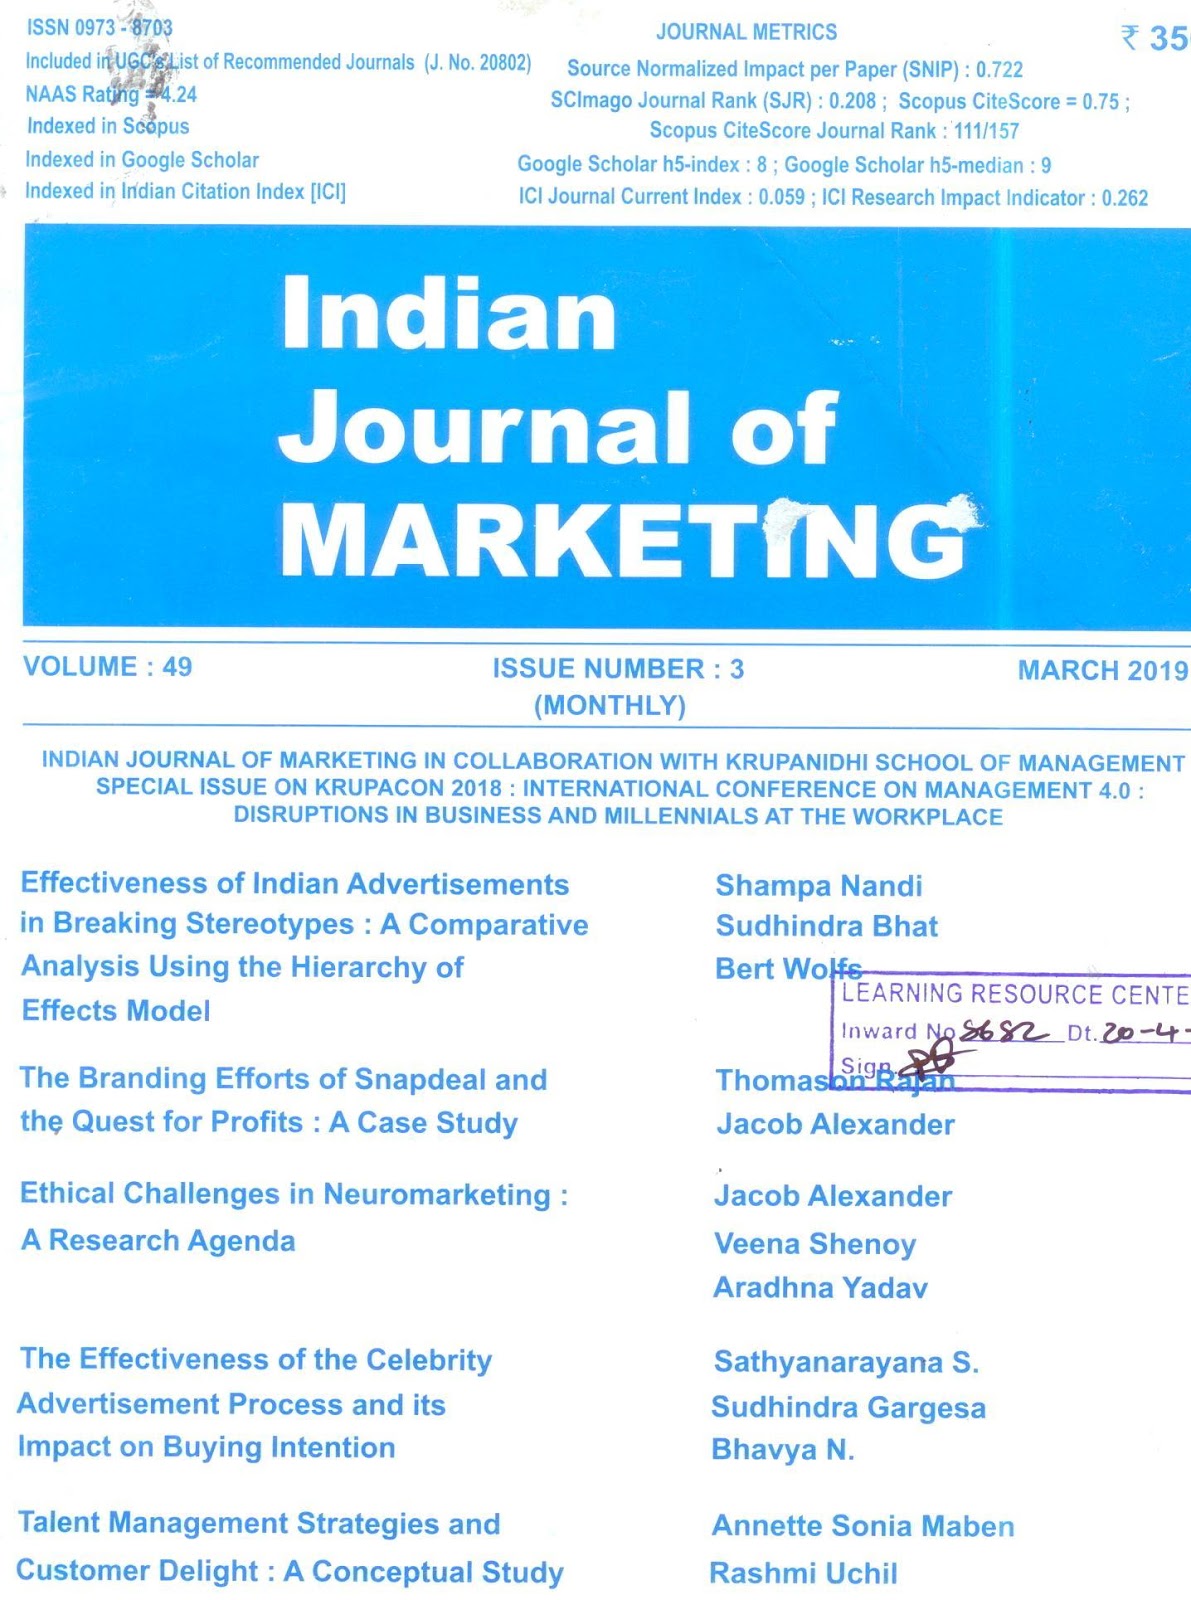 http://indianjournalofmarketing.com/index.php/ijom/issue/view/8412